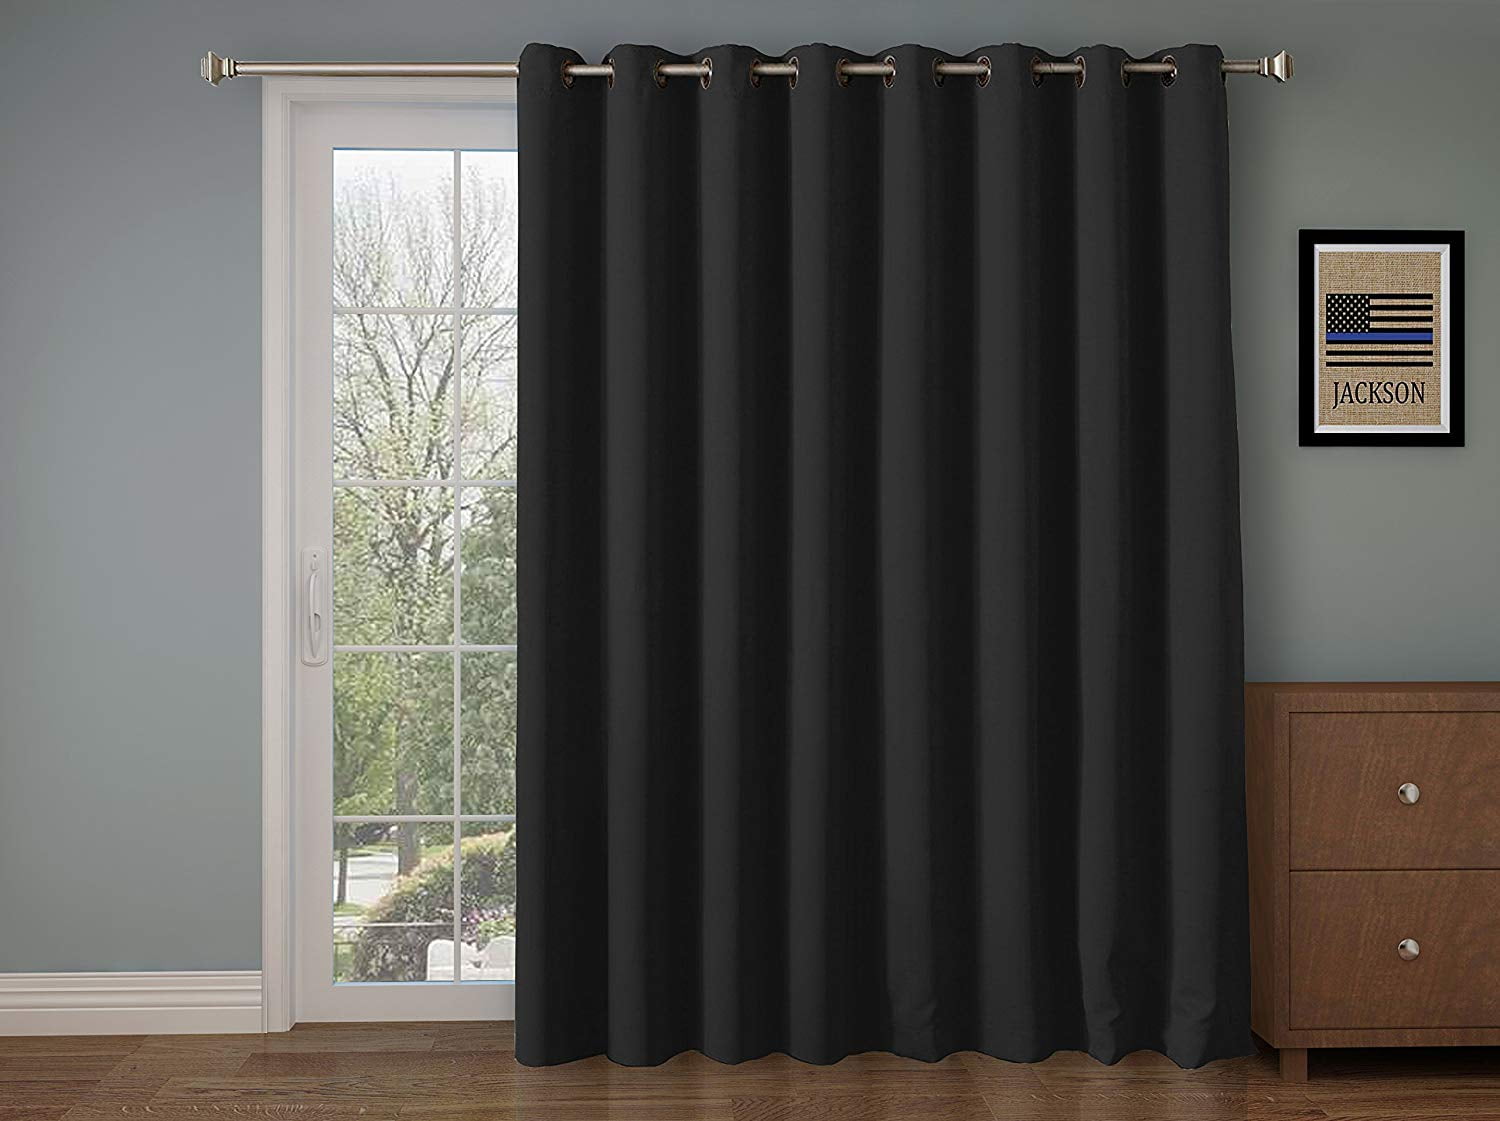 Rose Home Fashion Rhf Room Divider Curtain Panel, Blackout&Thermal